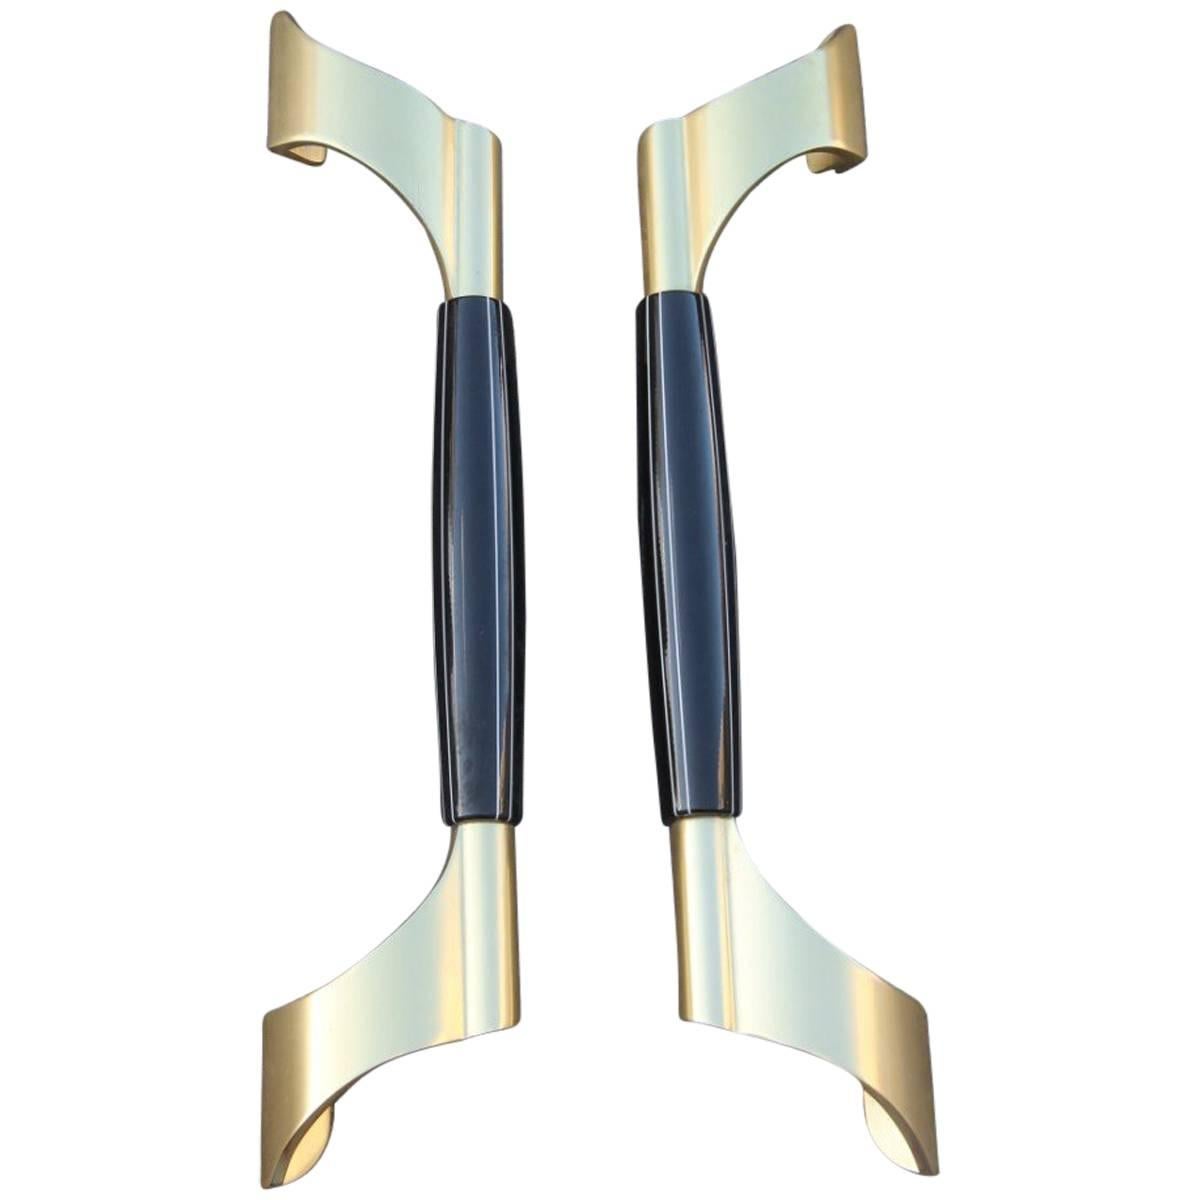 Big Important Italian Handles from 1960s, Very Special Design